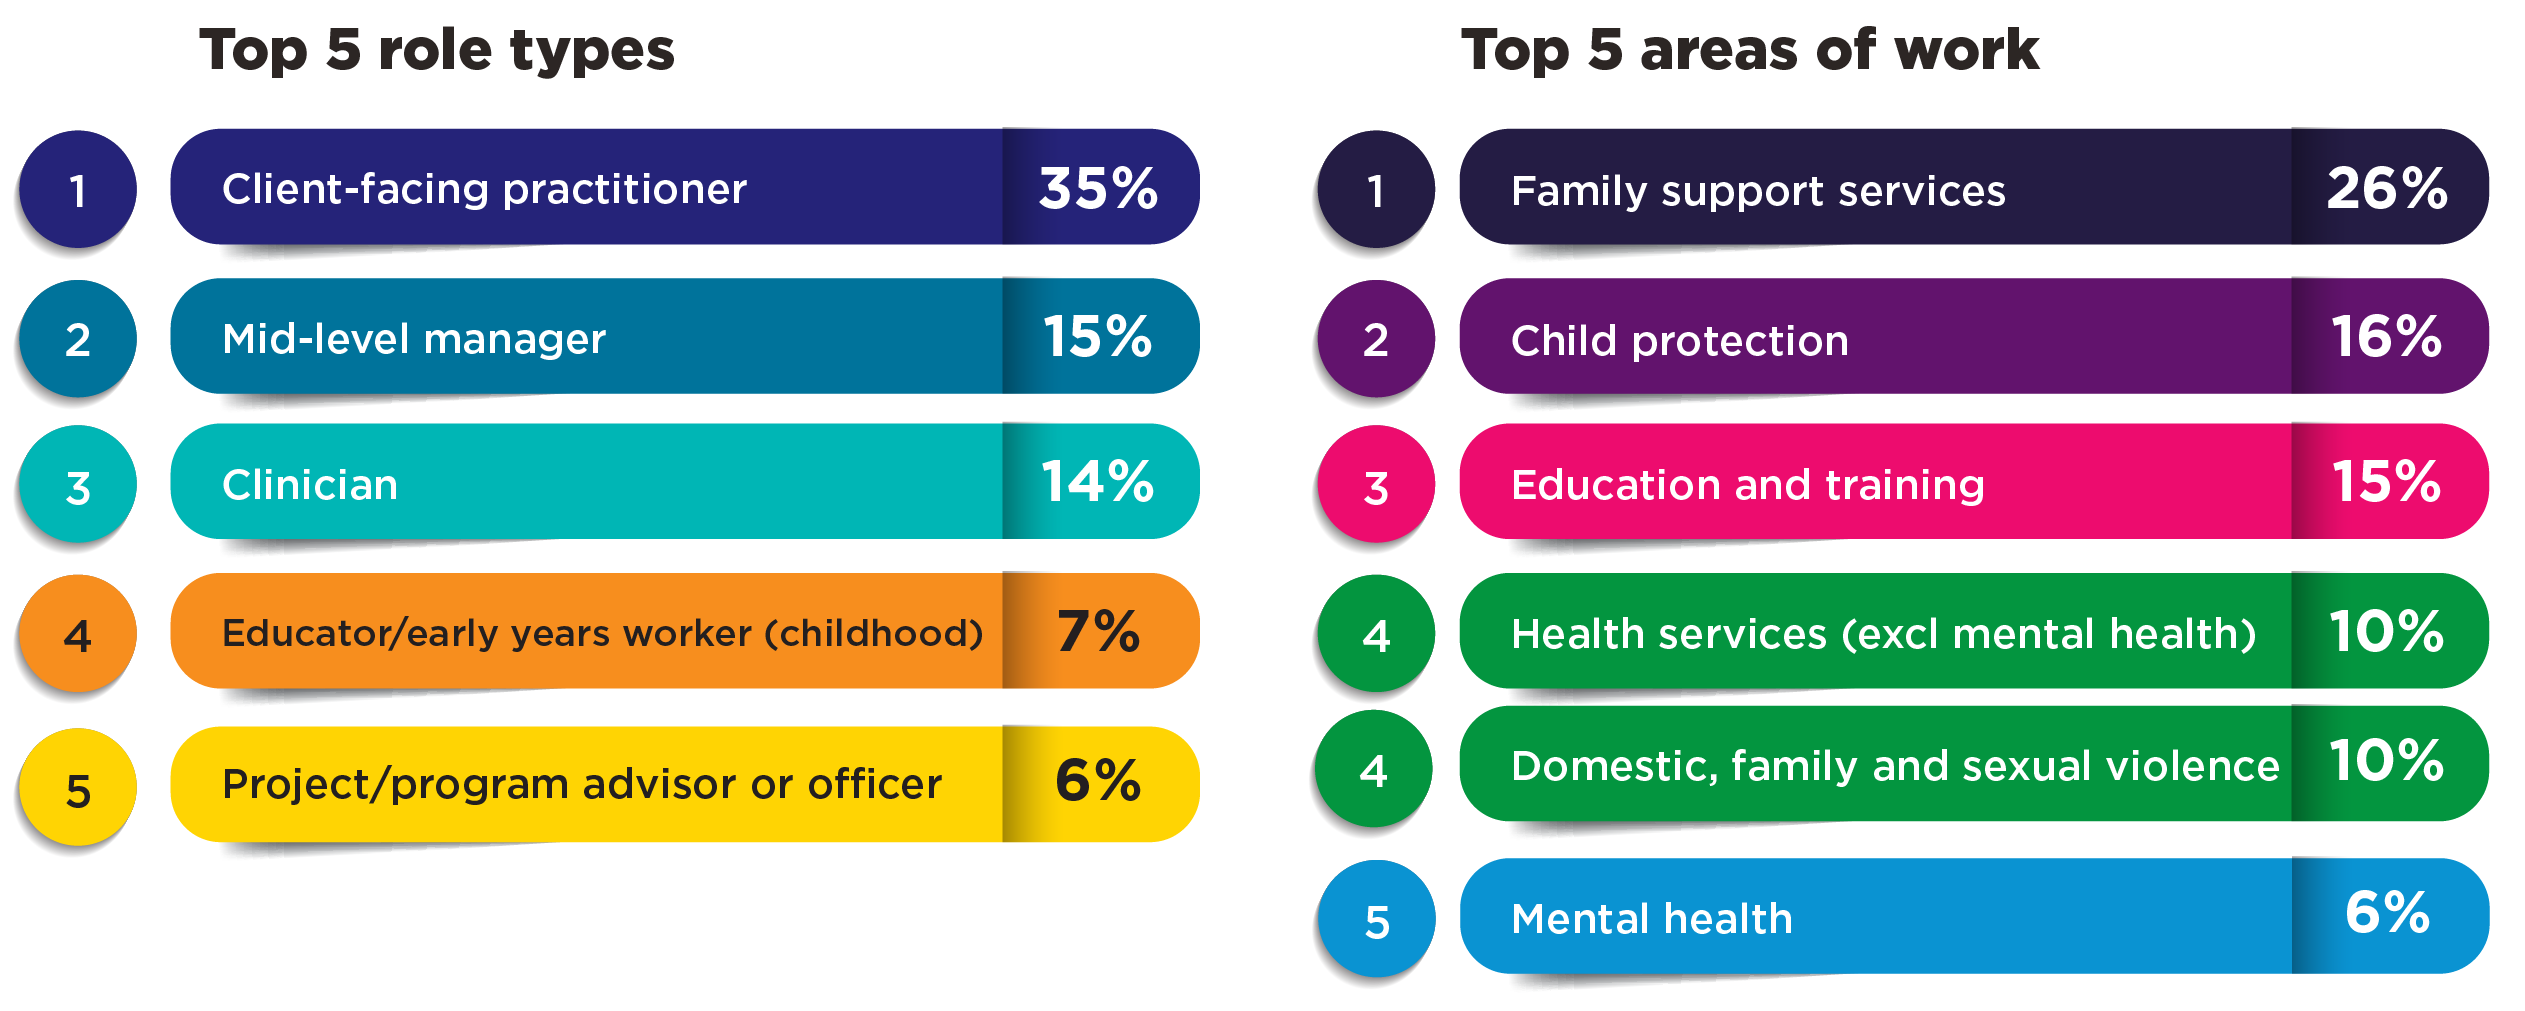 Top 5 role types: 1. Client-facing practitioner 35%, 2. Mid-level manager 15%. 3. Clinician 14%, 4. Educator/early years worker (childhood) 7%, Project/program advisor or officer 6%. Top 5 areas of work: 1. Family support services 26%, 2. Child protection 16%, 3. Education and training 15%, 4. Health services (excl mental health) 10%, 4. Domestic, family and sexual violence 10%, 5. Mental health 6%.